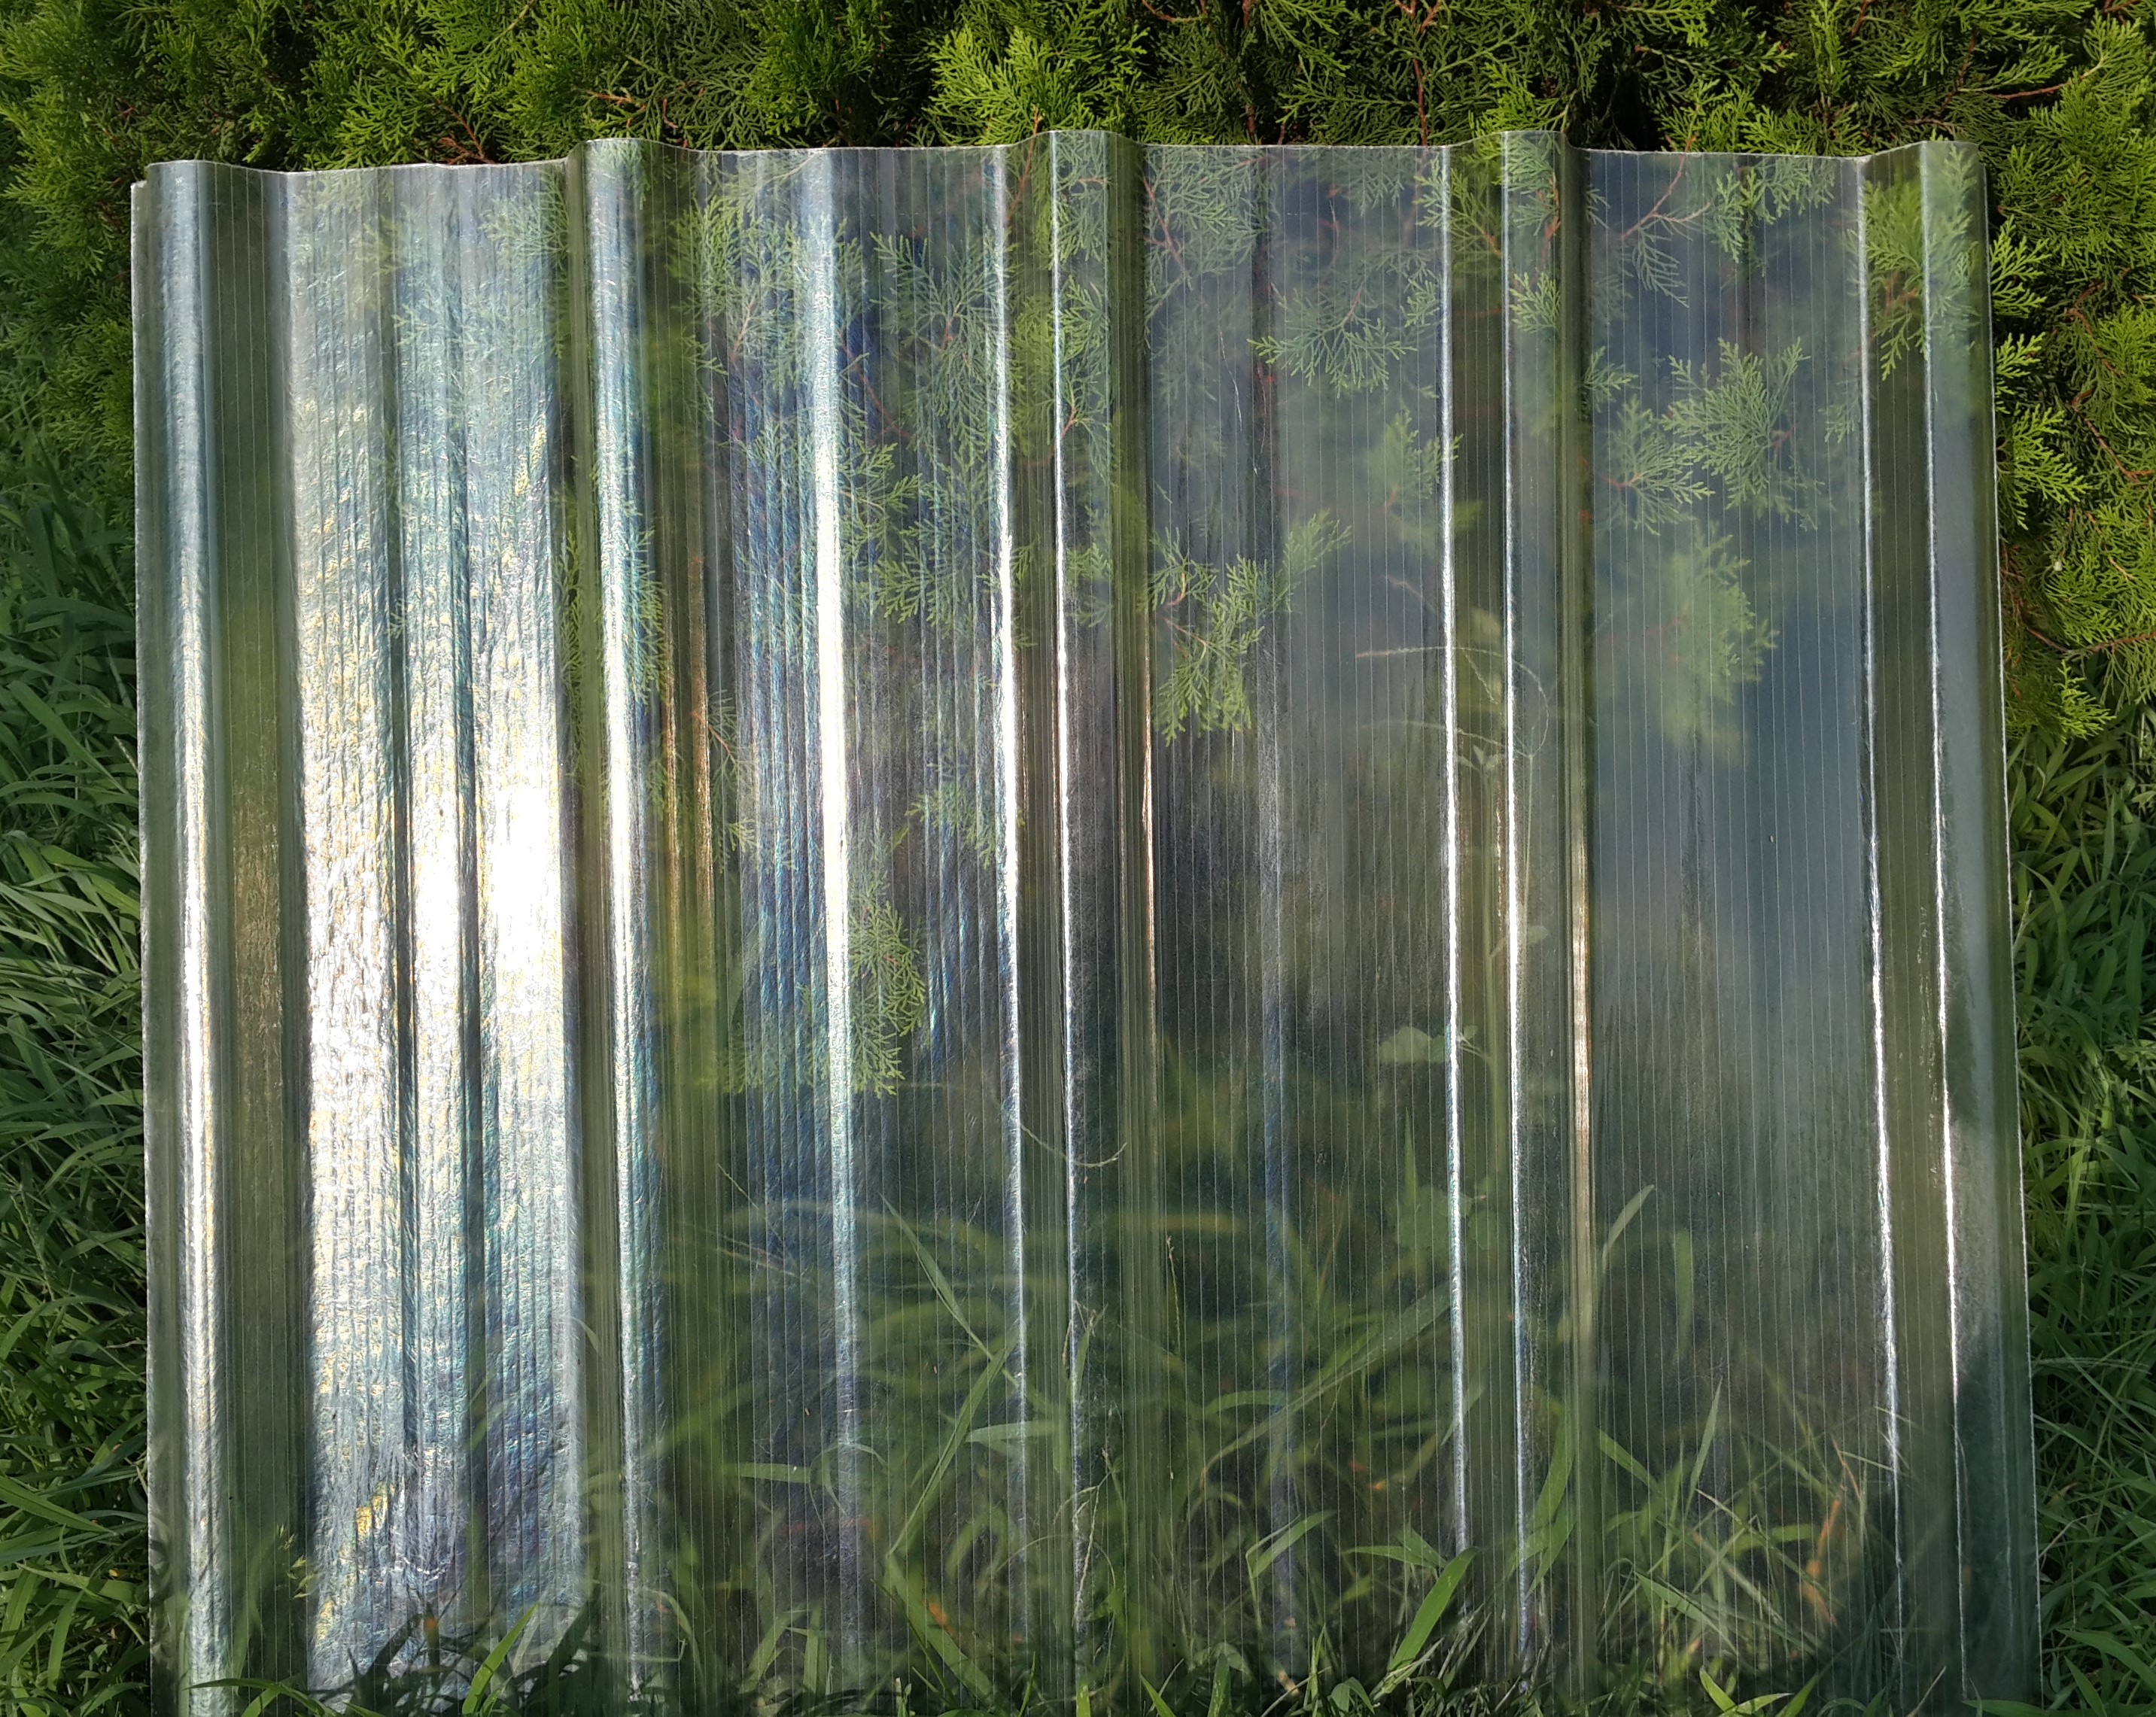 New arrival translucent corrugate plastic pvc roofing sheet for shed